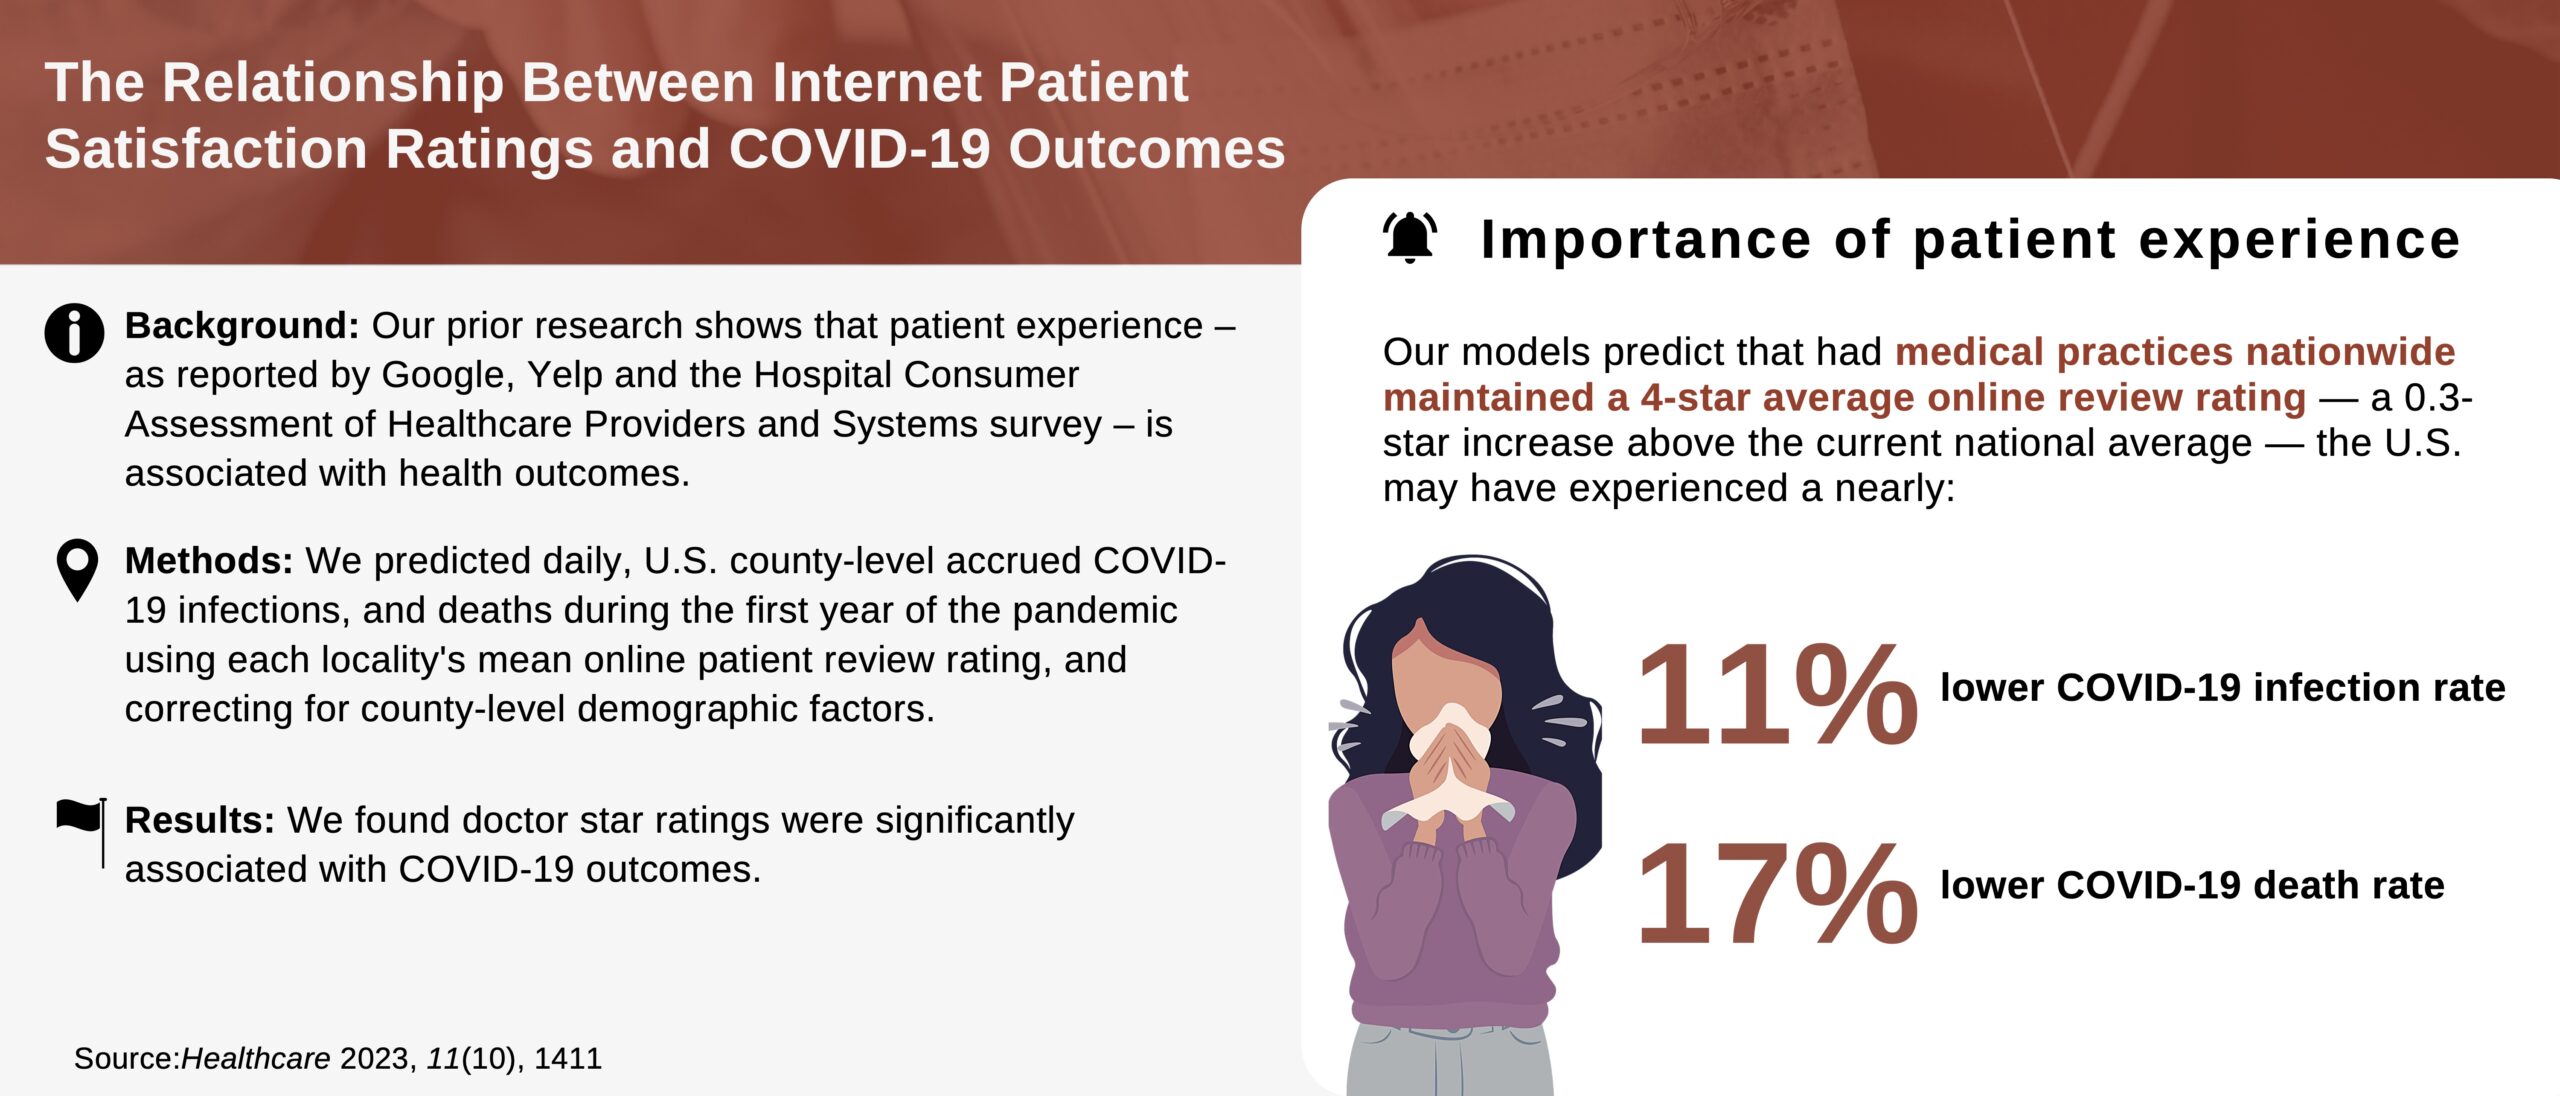 Infographic showing the relationship between internet patient satisfaction ratings and COVID-19 outcomes | Vanguard Communications | Denver